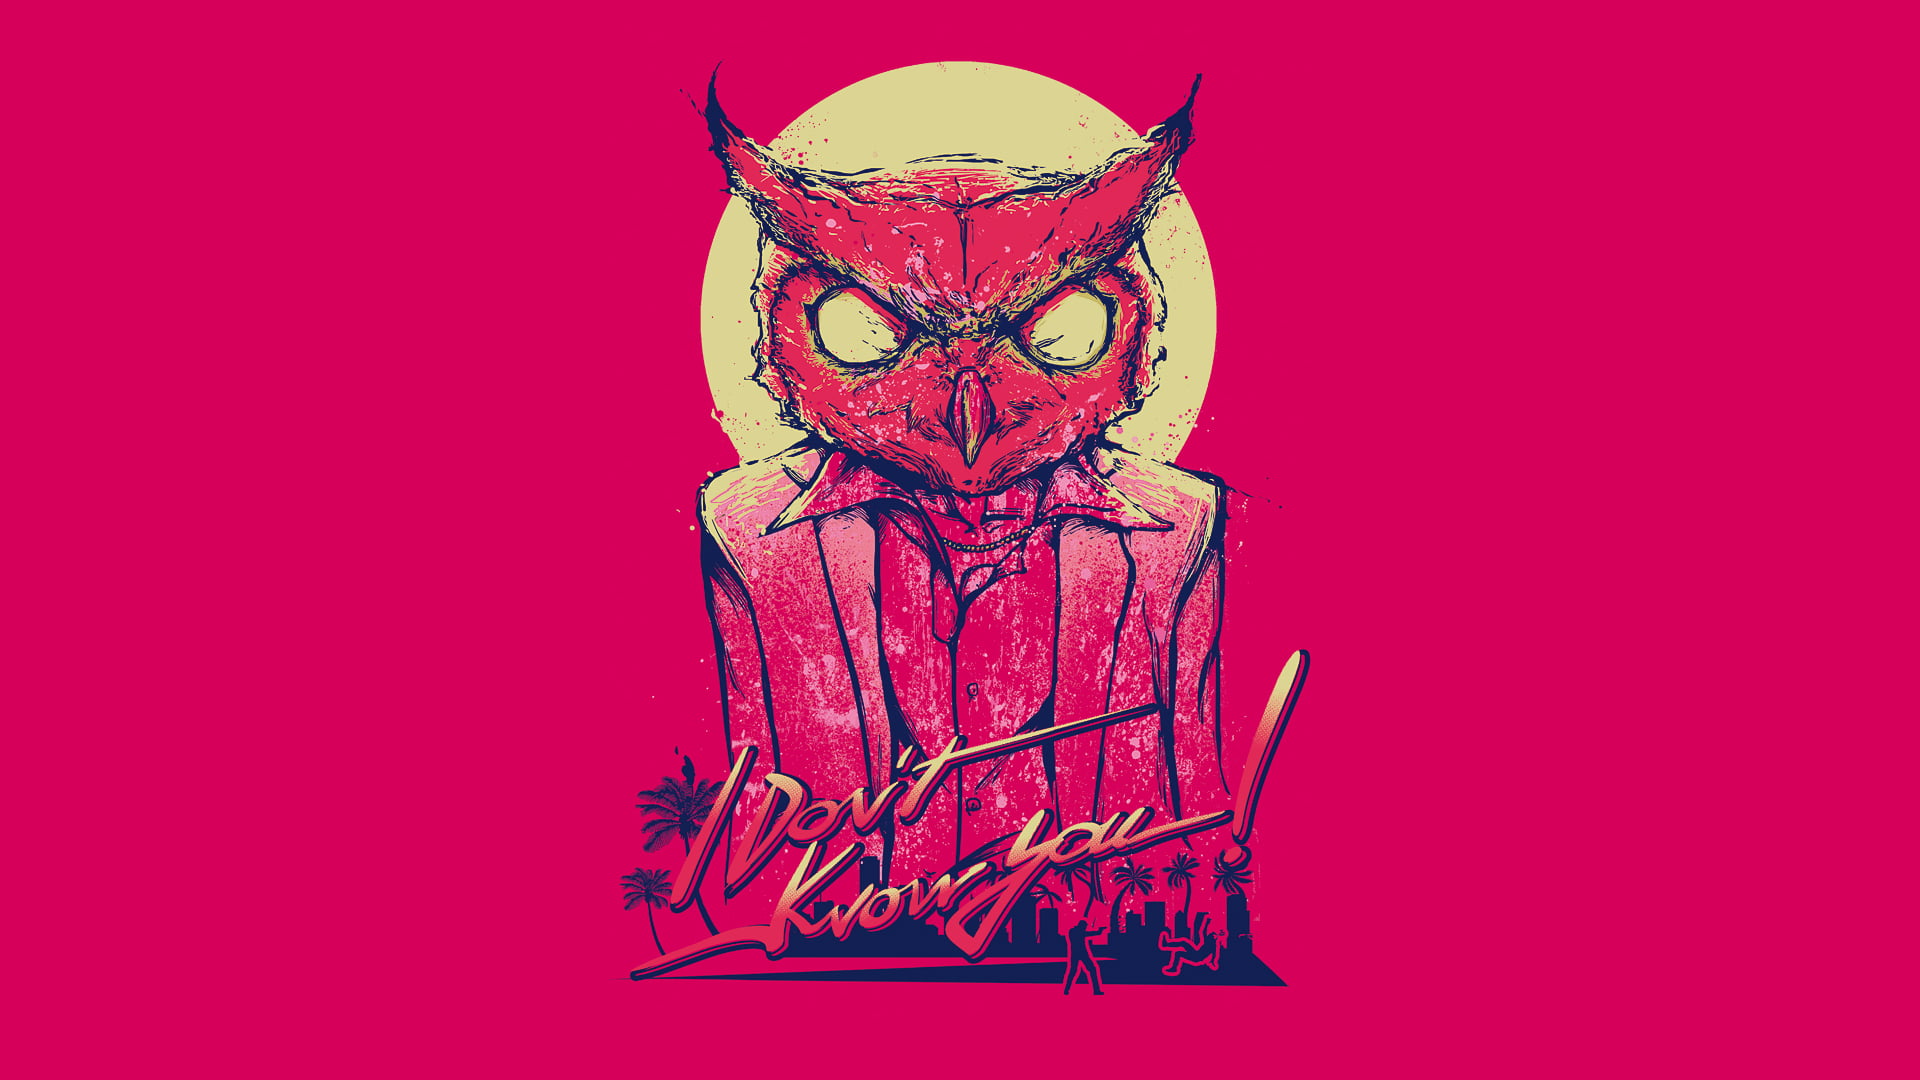 red owl sketch with i don't know you text overlay, pink, Hotline Miami